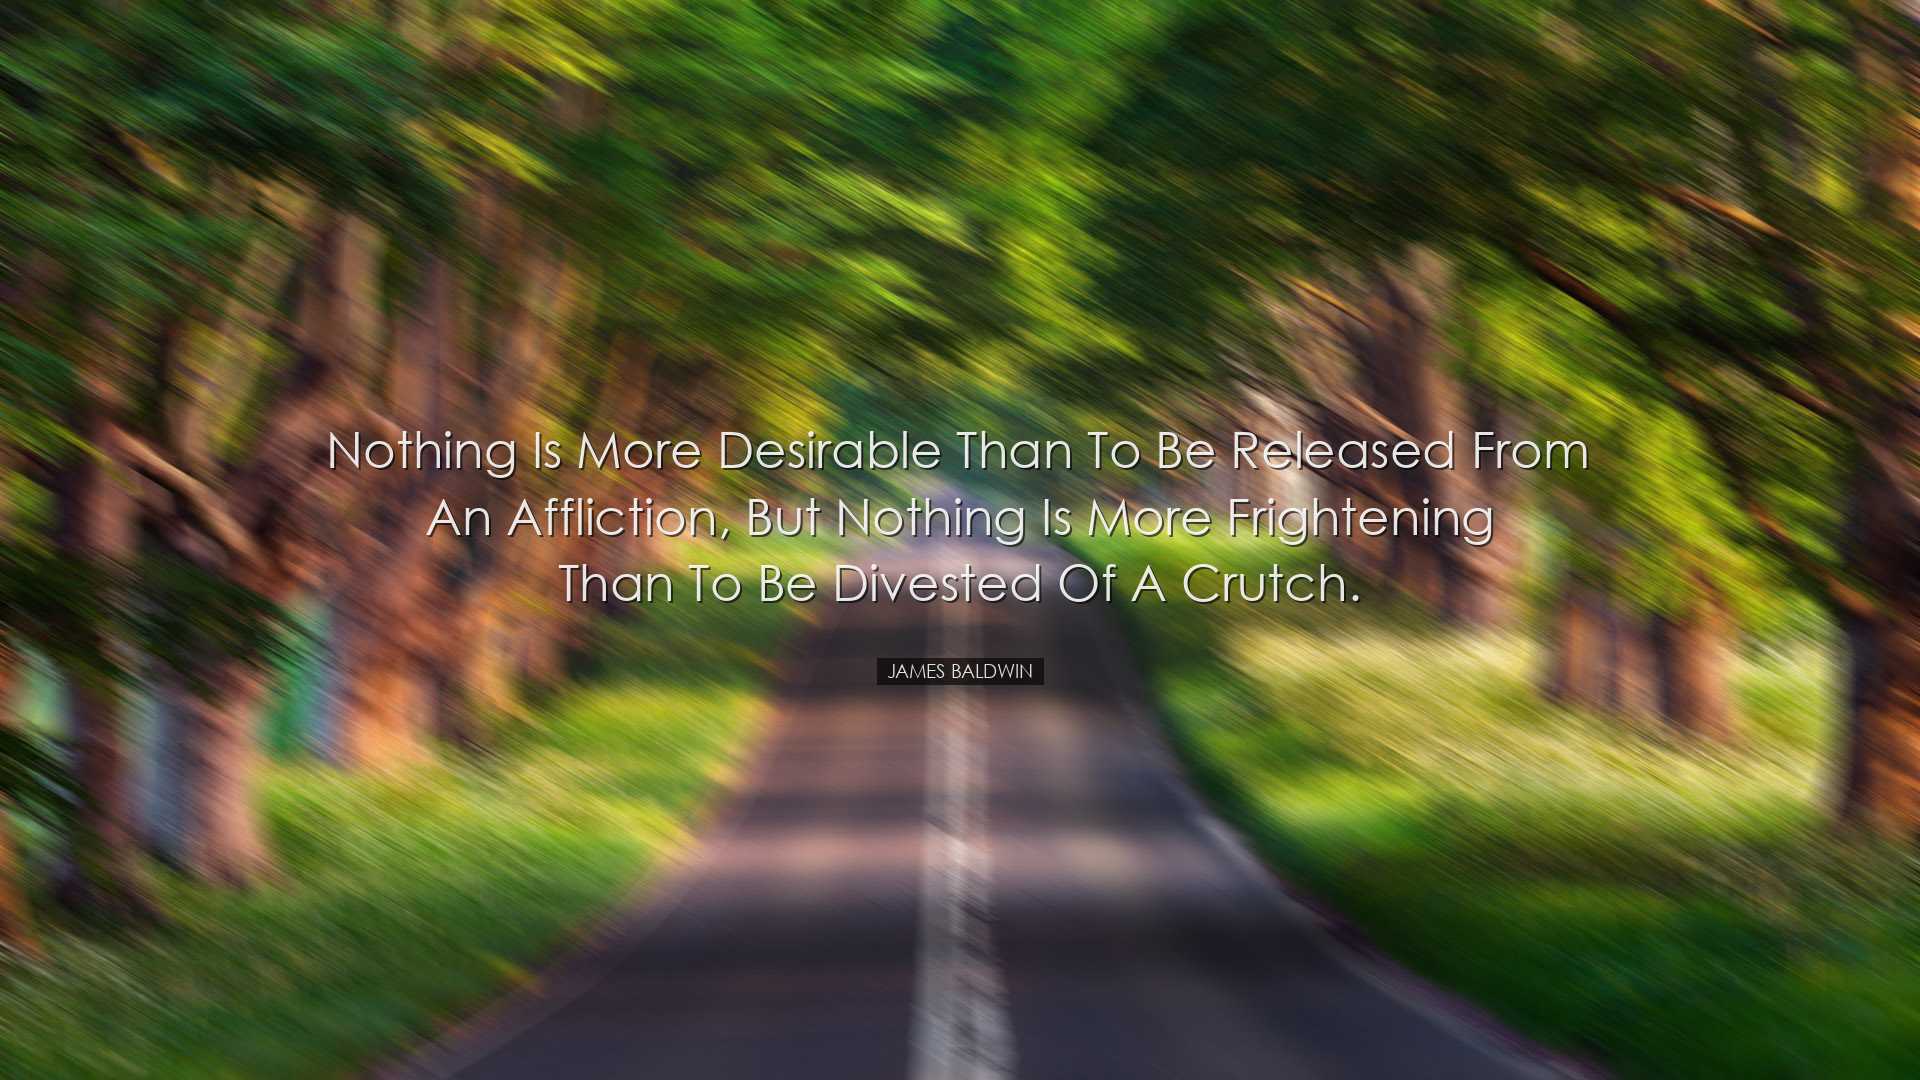 Nothing is more desirable than to be released from an affliction,